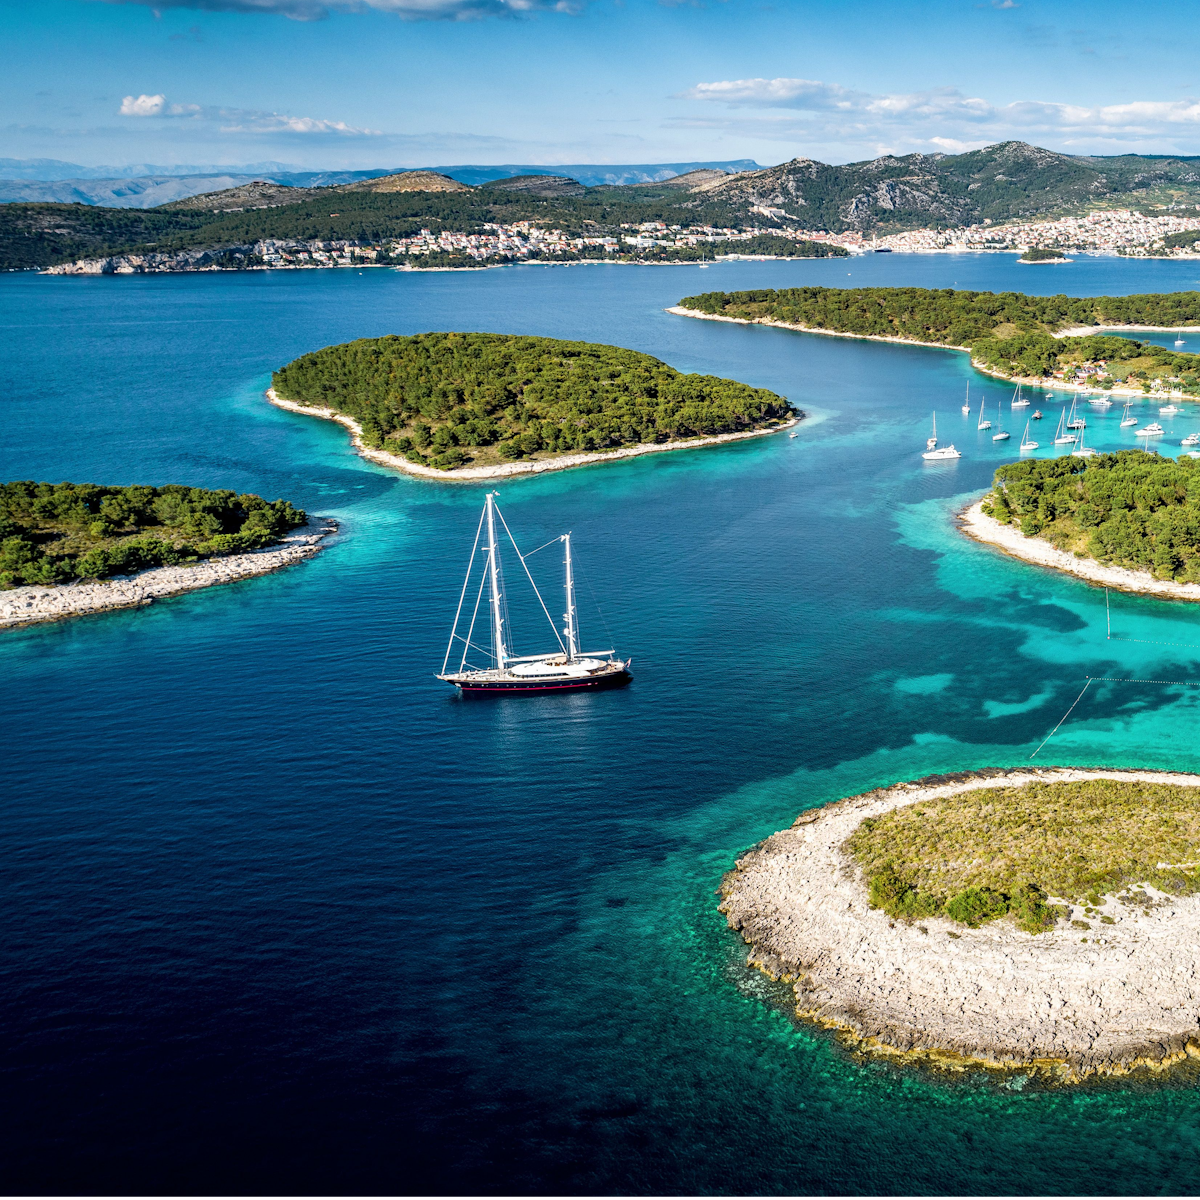 Just a few things to note, to consider, and to plan for and for who is Croatia suitable sailing destination.